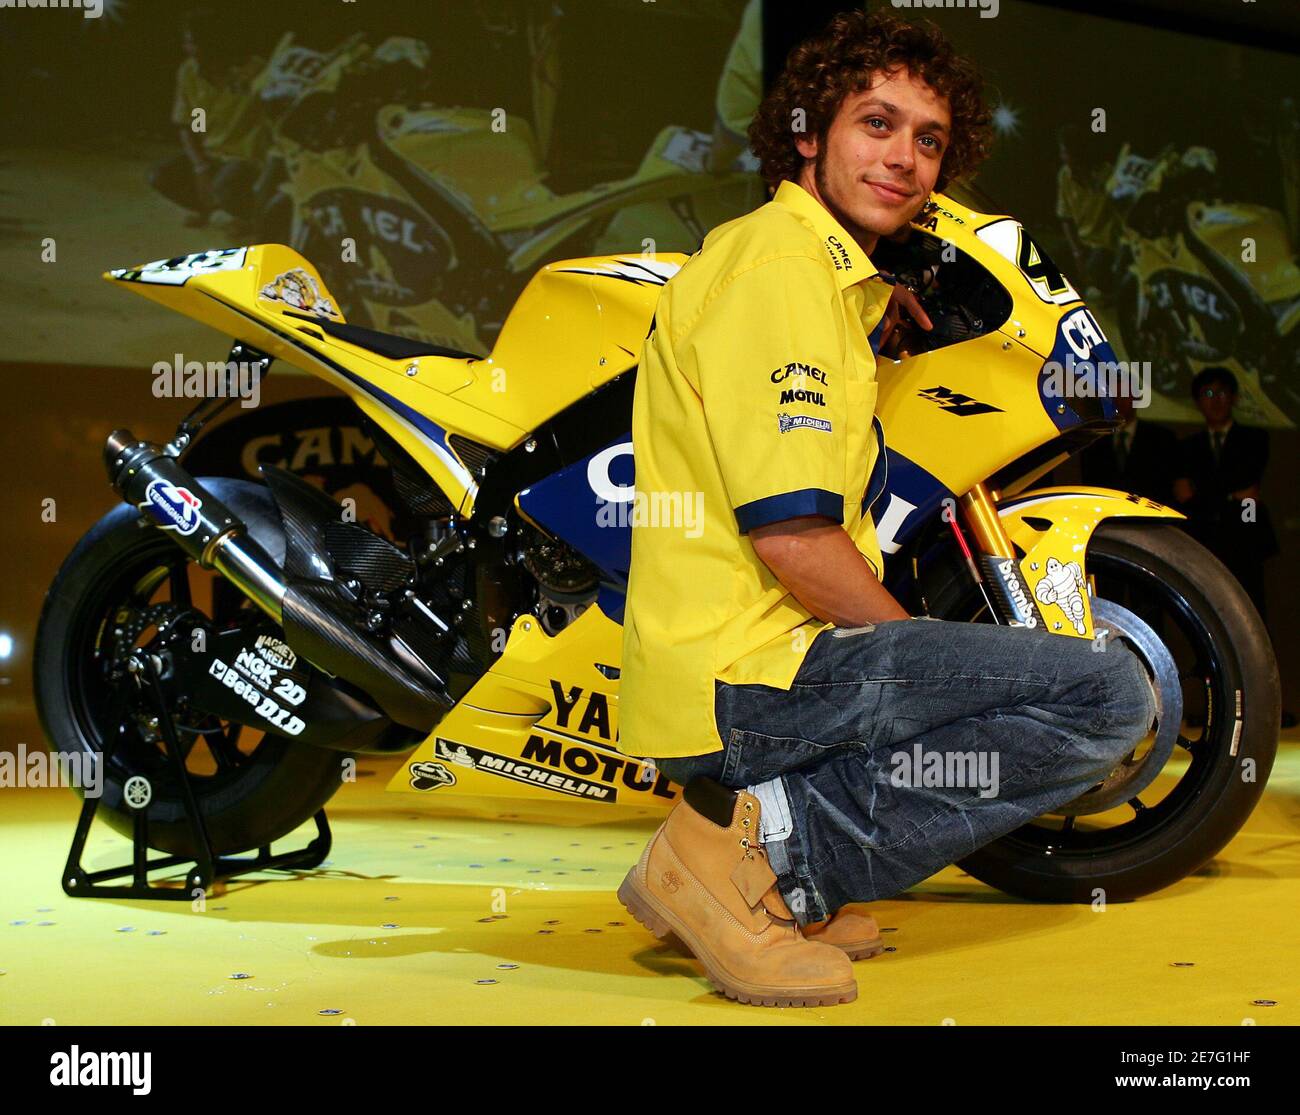 MotoGP world champion Valentino Rossi of Italy poses with his new Yamaha  YZR-M1 2006 during a news conference in Milan, northern Italy, February 27,  2006. REUTERS/Daniele La Monaca Stock Photo - Alamy